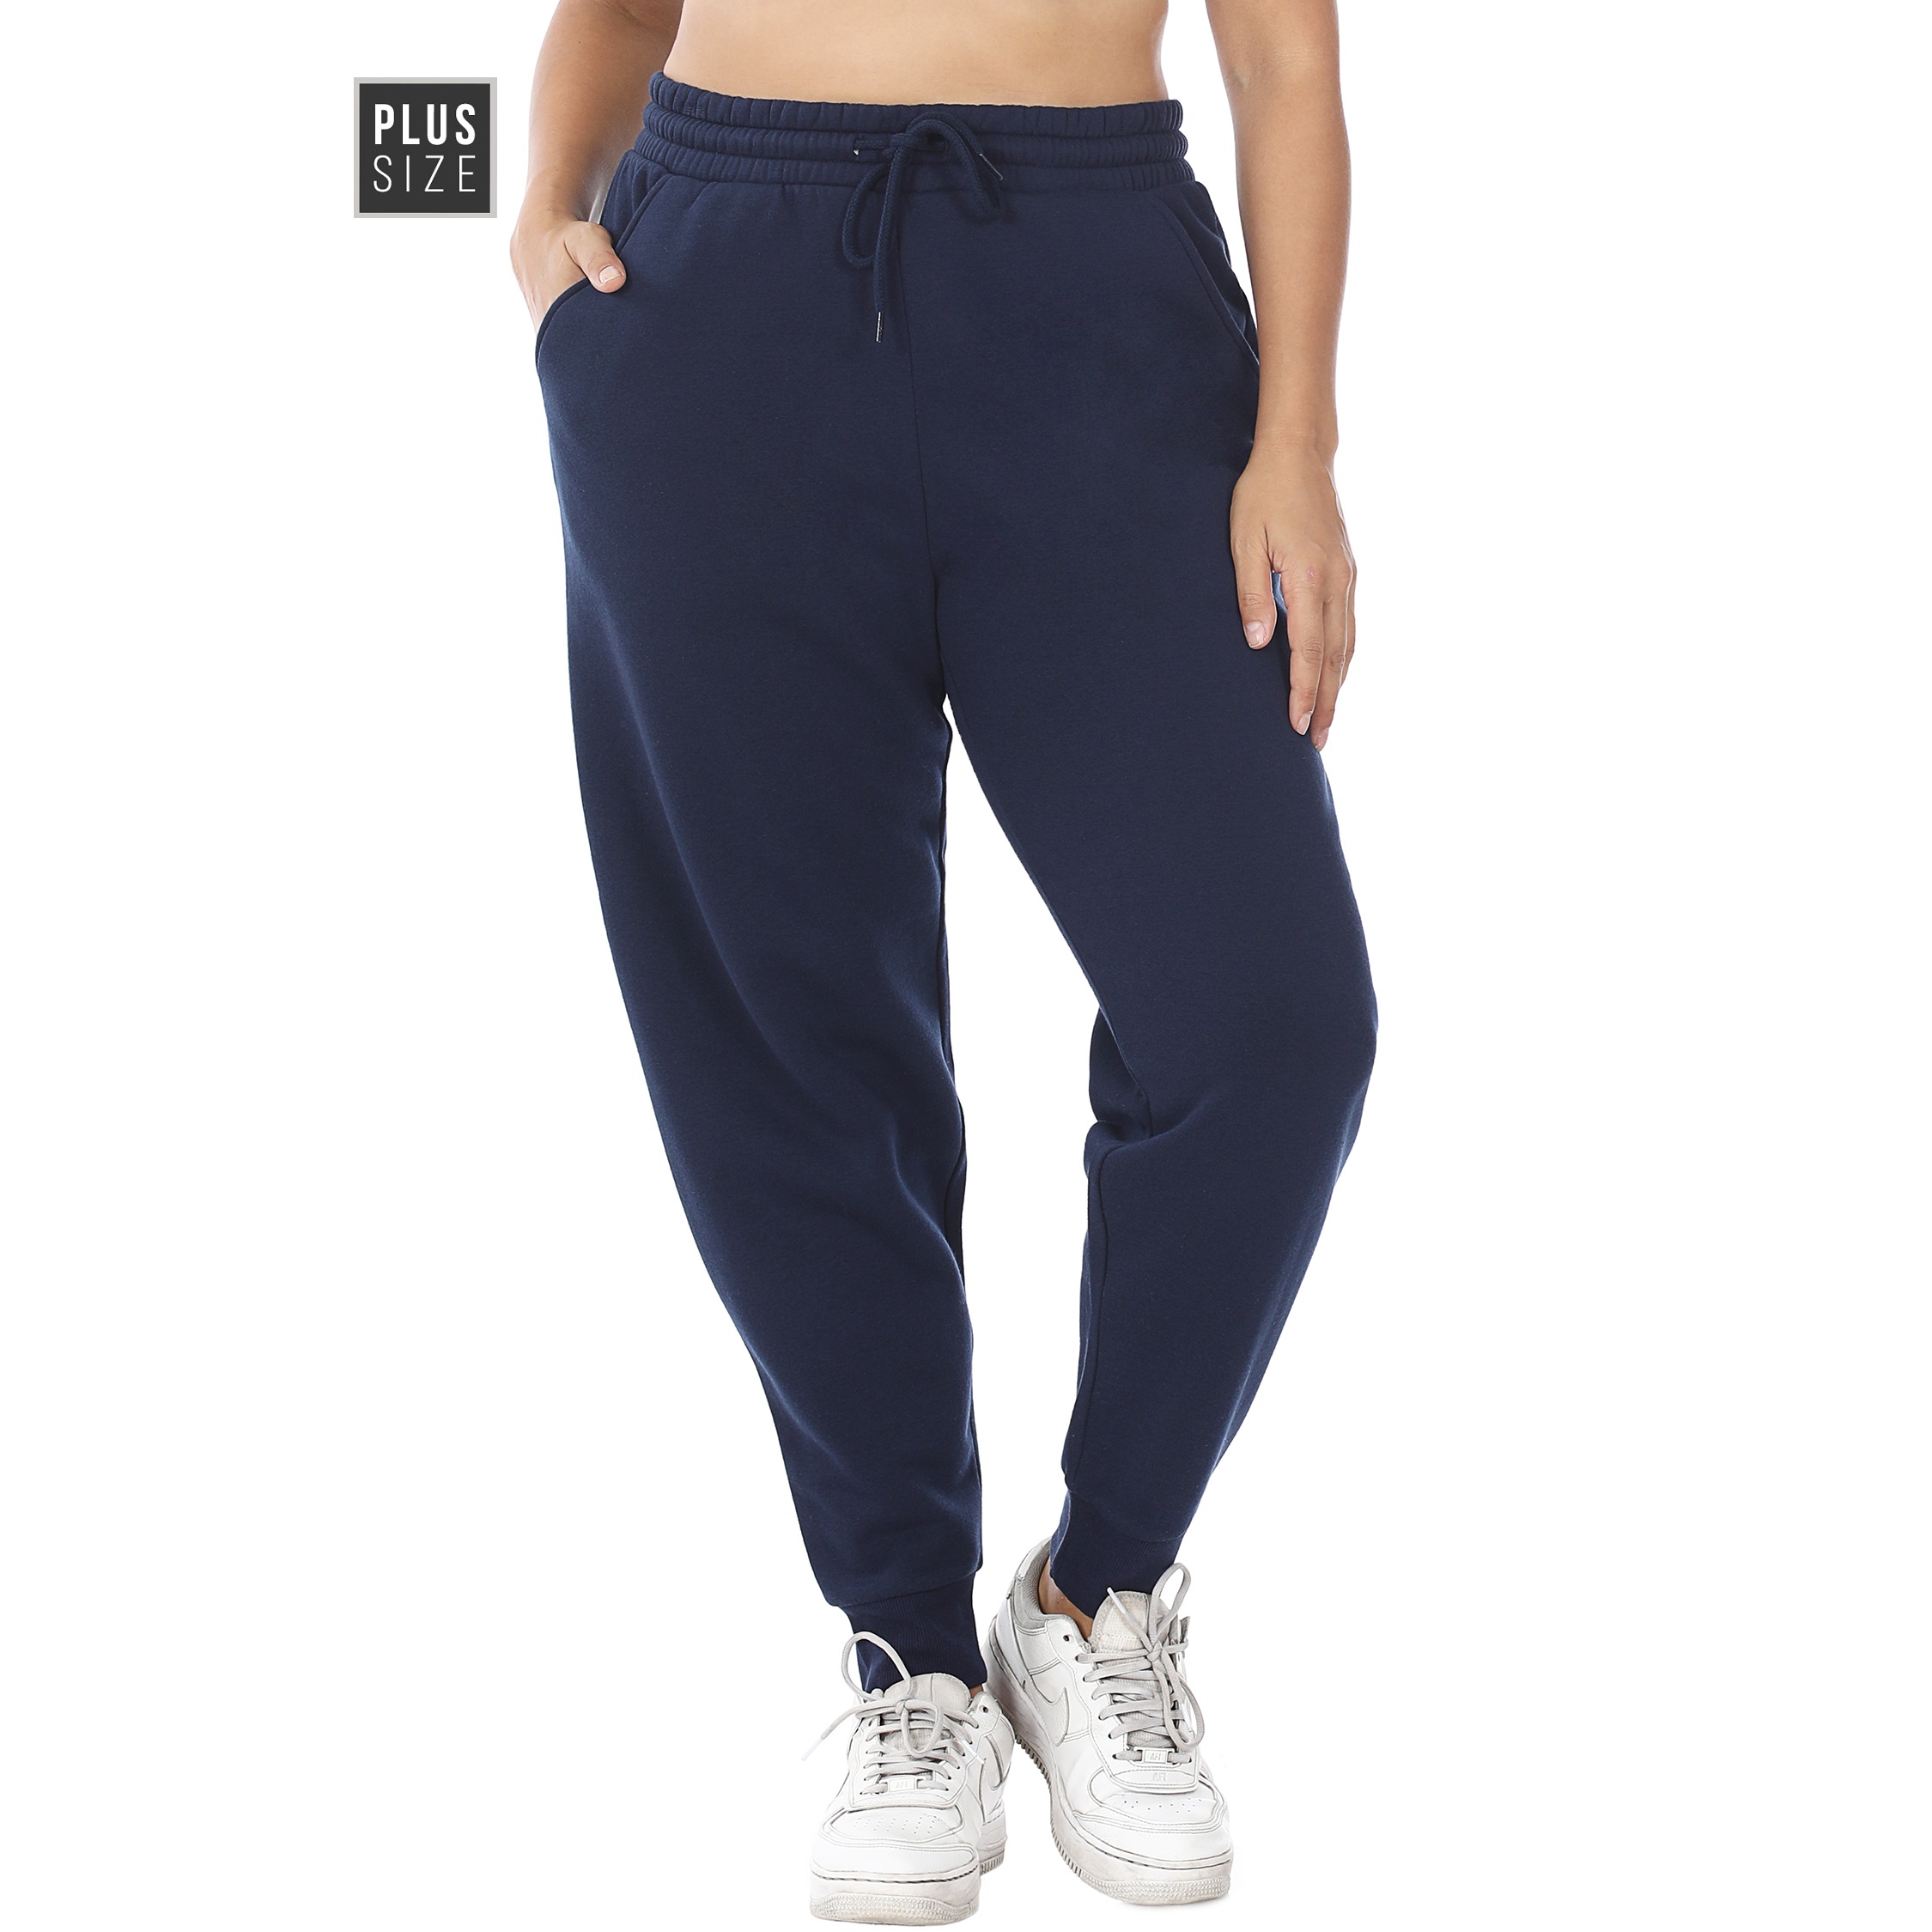 Women's Plus Size Sweatpants with pockets,  Fleece. Elastic Waistband with Draw String,